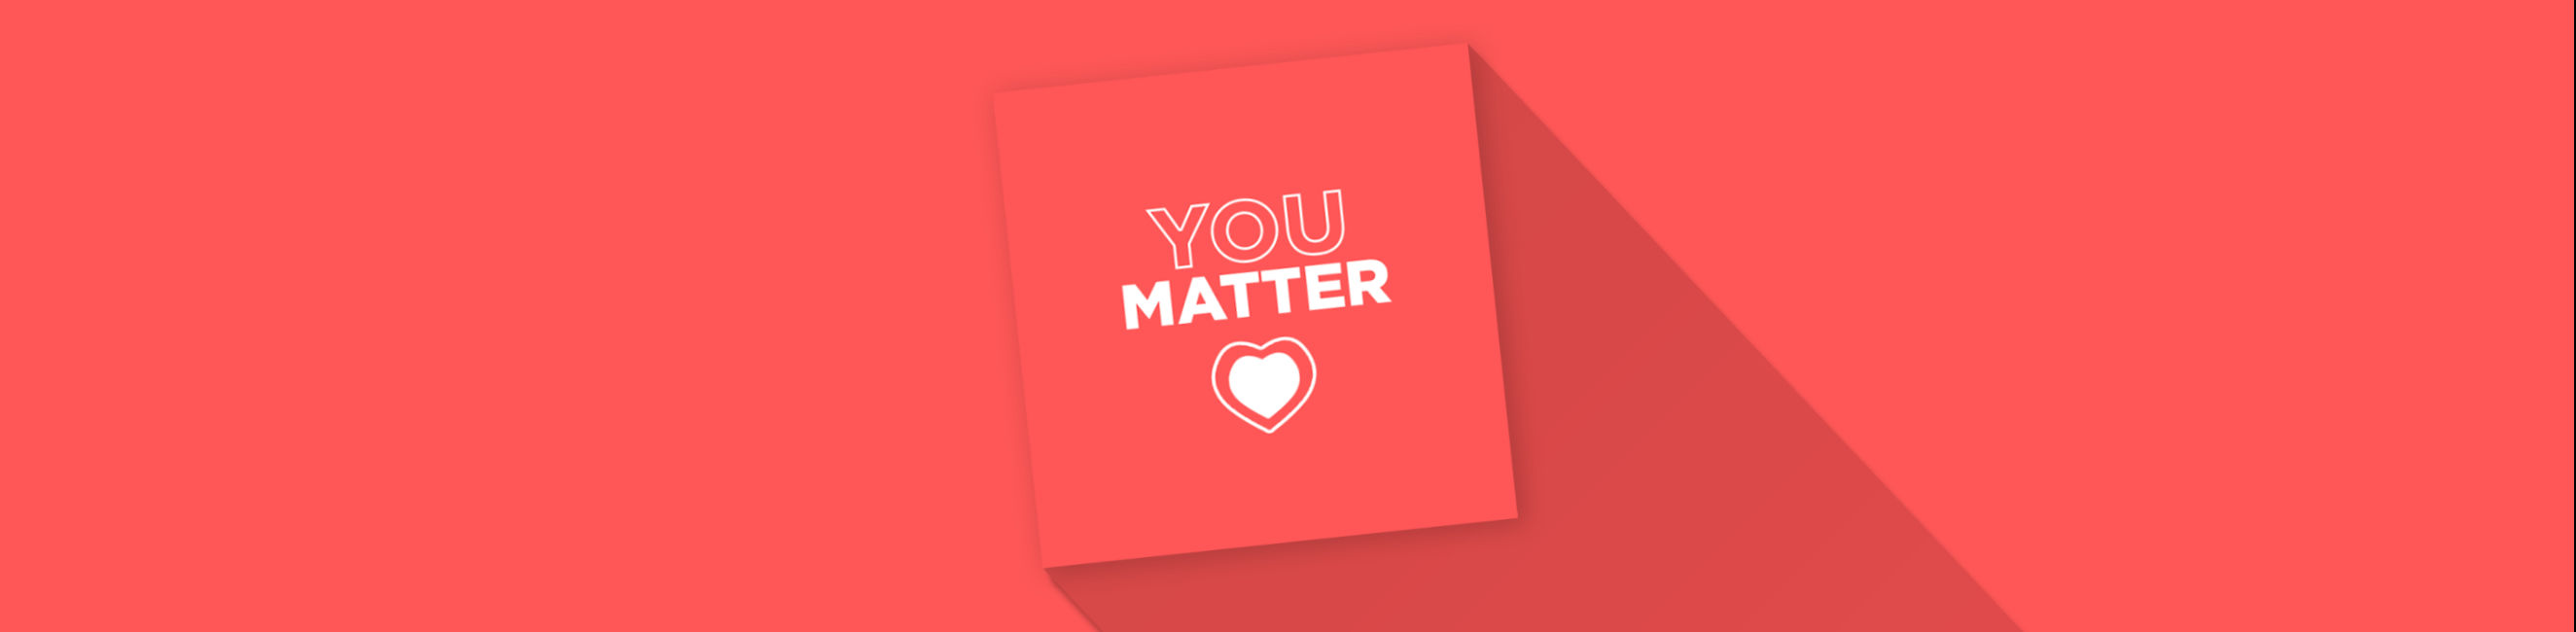 Reddish pink background with heart emblem and teach that reads You Matter